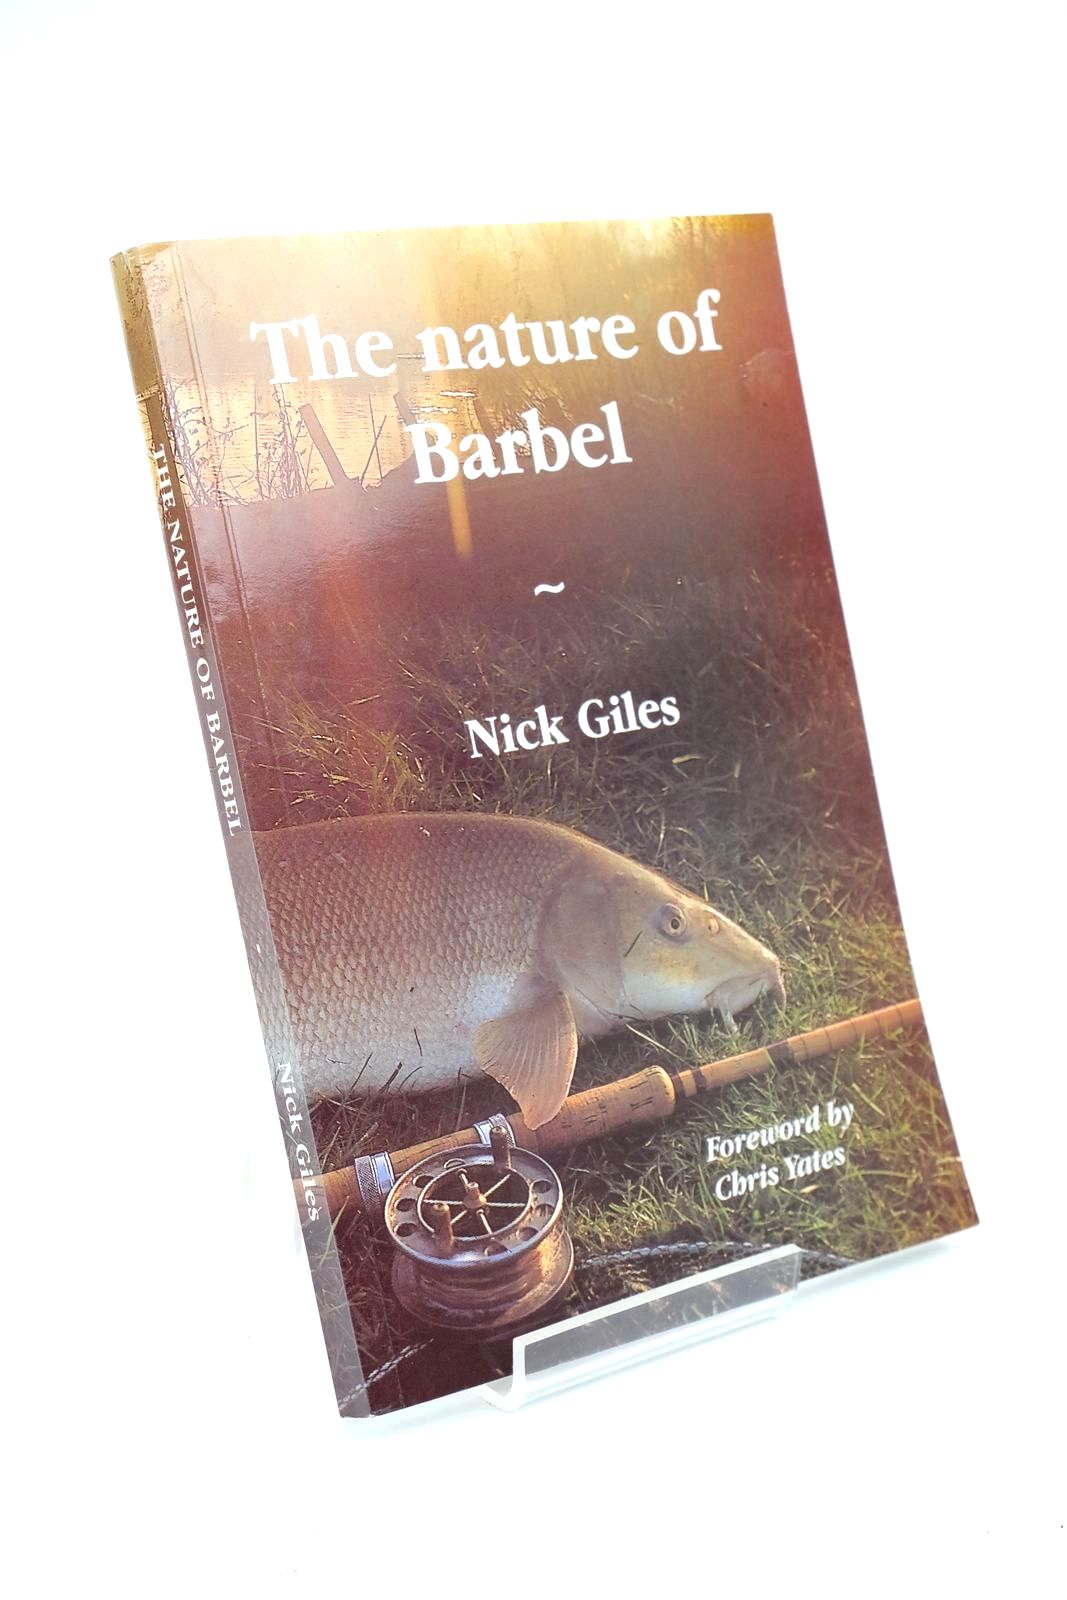 Photo of THE NATURE OF BARBEL written by Giles, Nick Yates, Chris published by Perca Press (STOCK CODE: 1323001)  for sale by Stella & Rose's Books